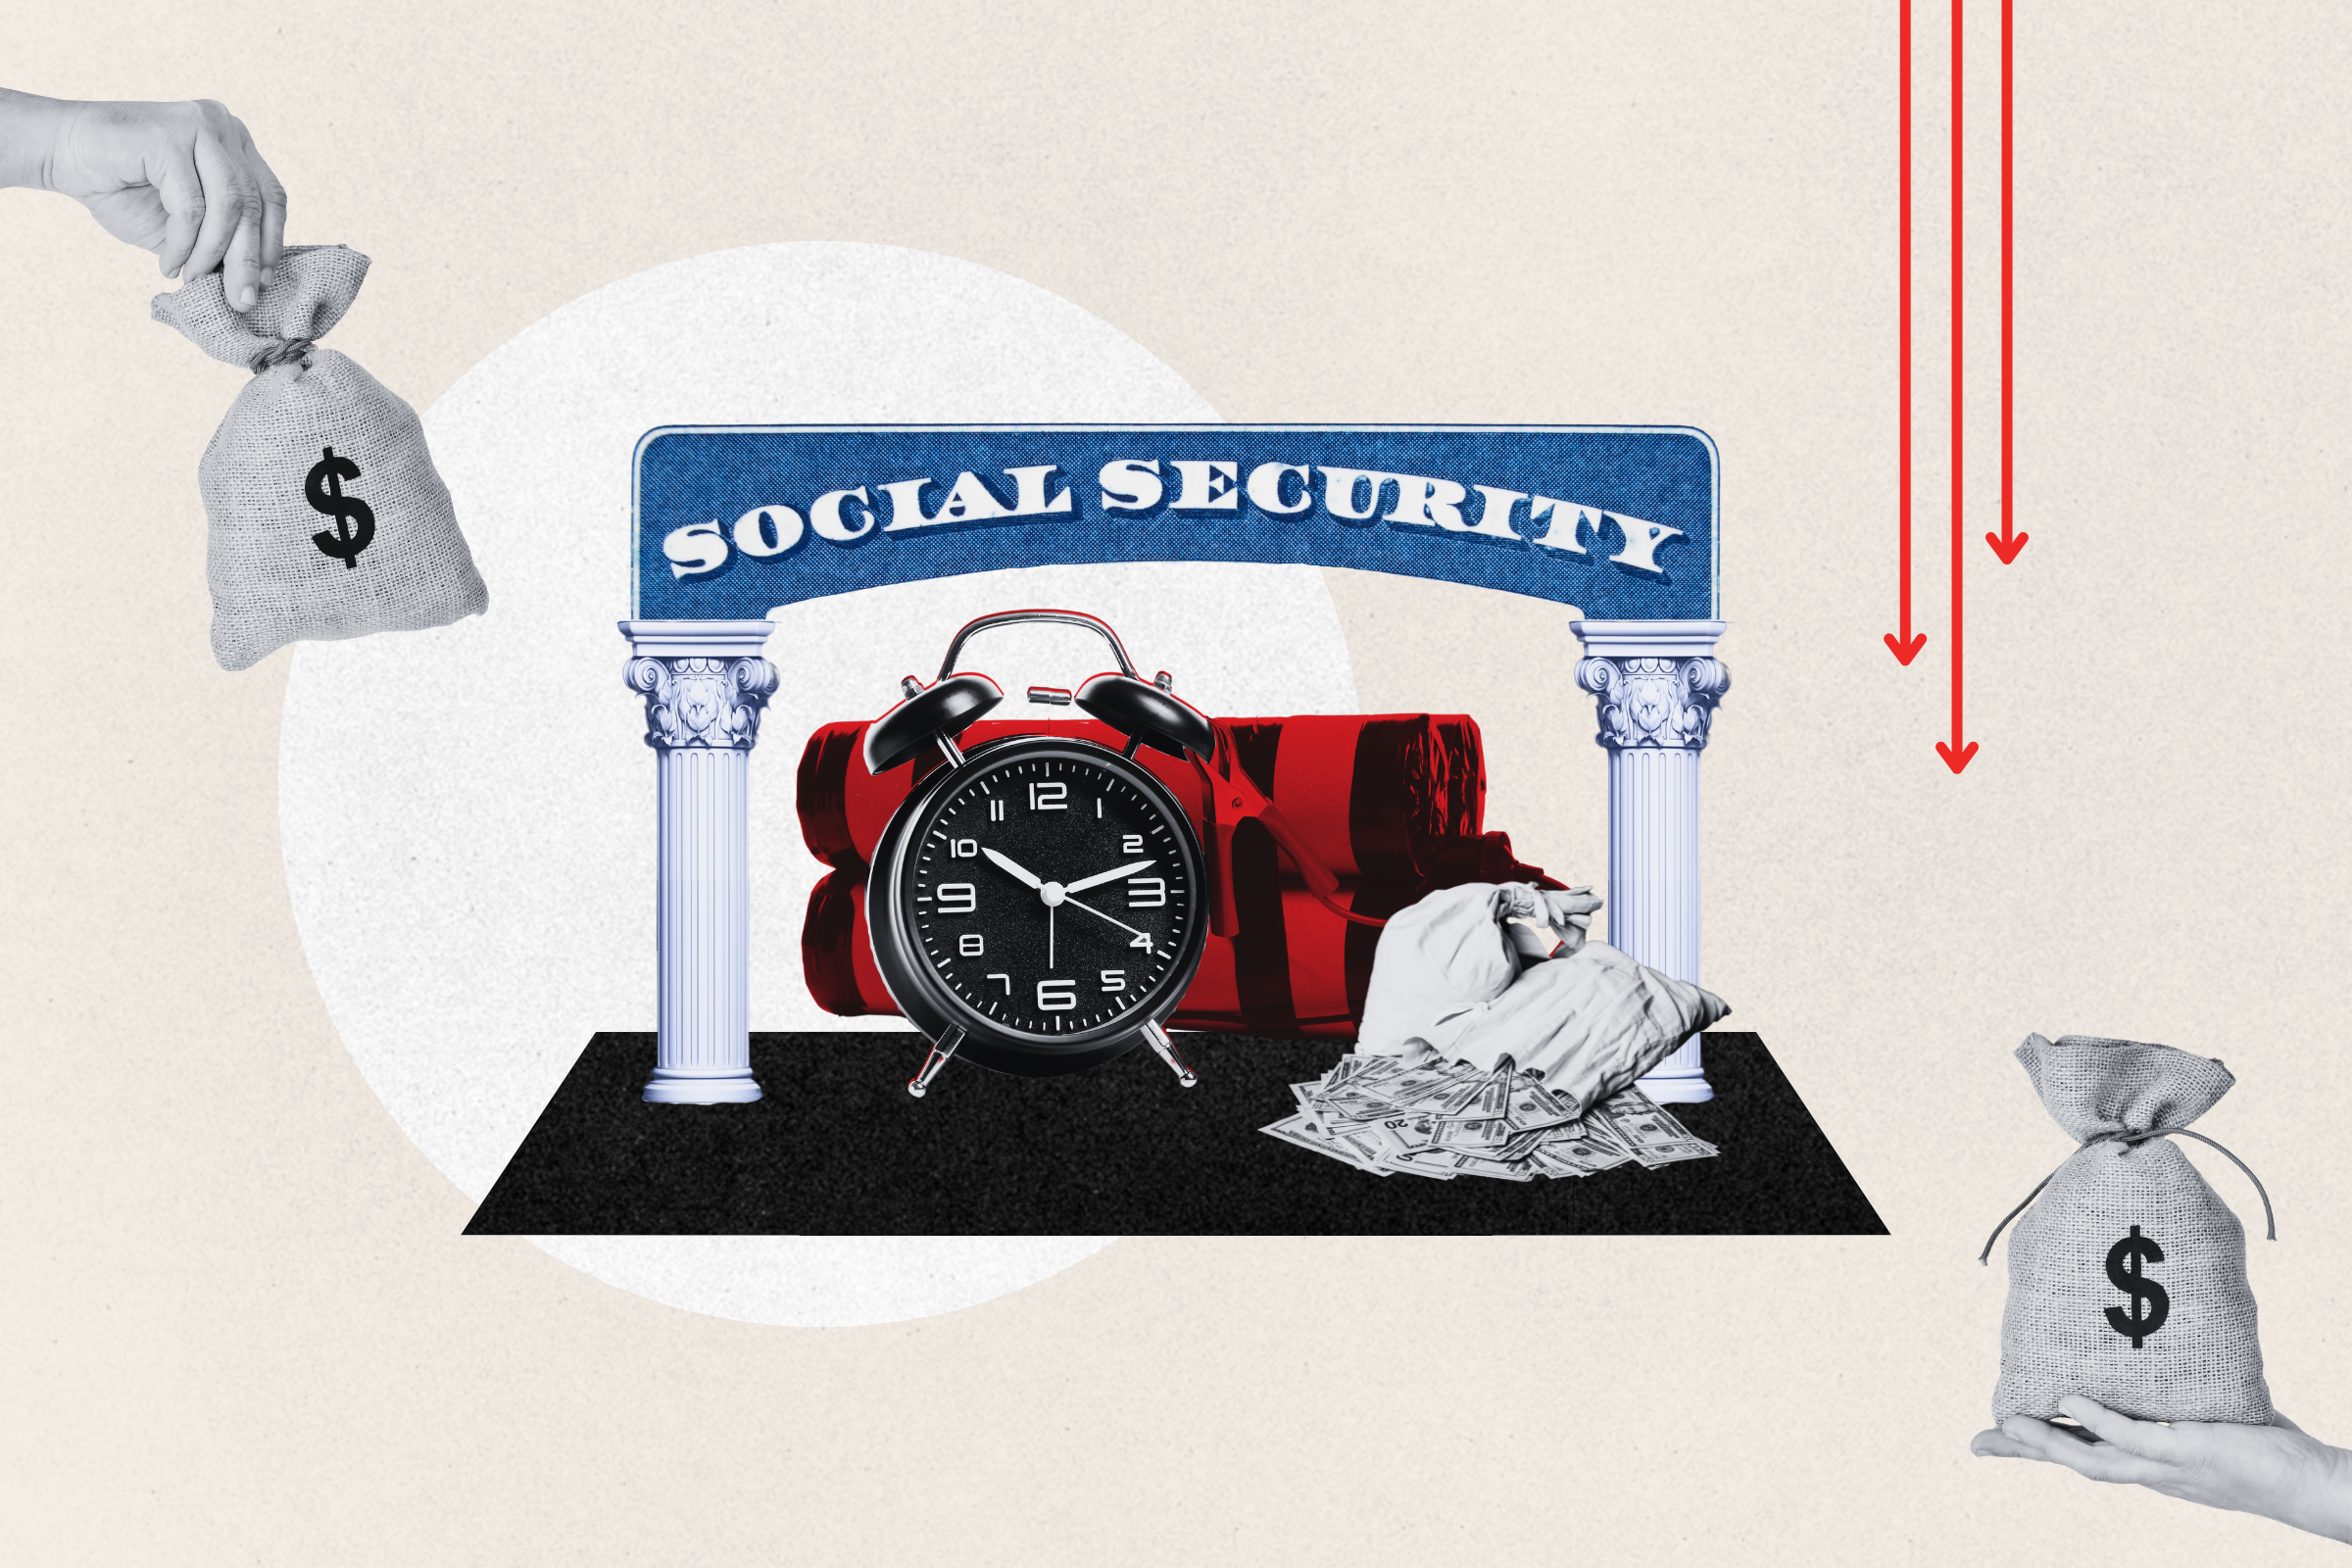 America’s Social Security timebomb